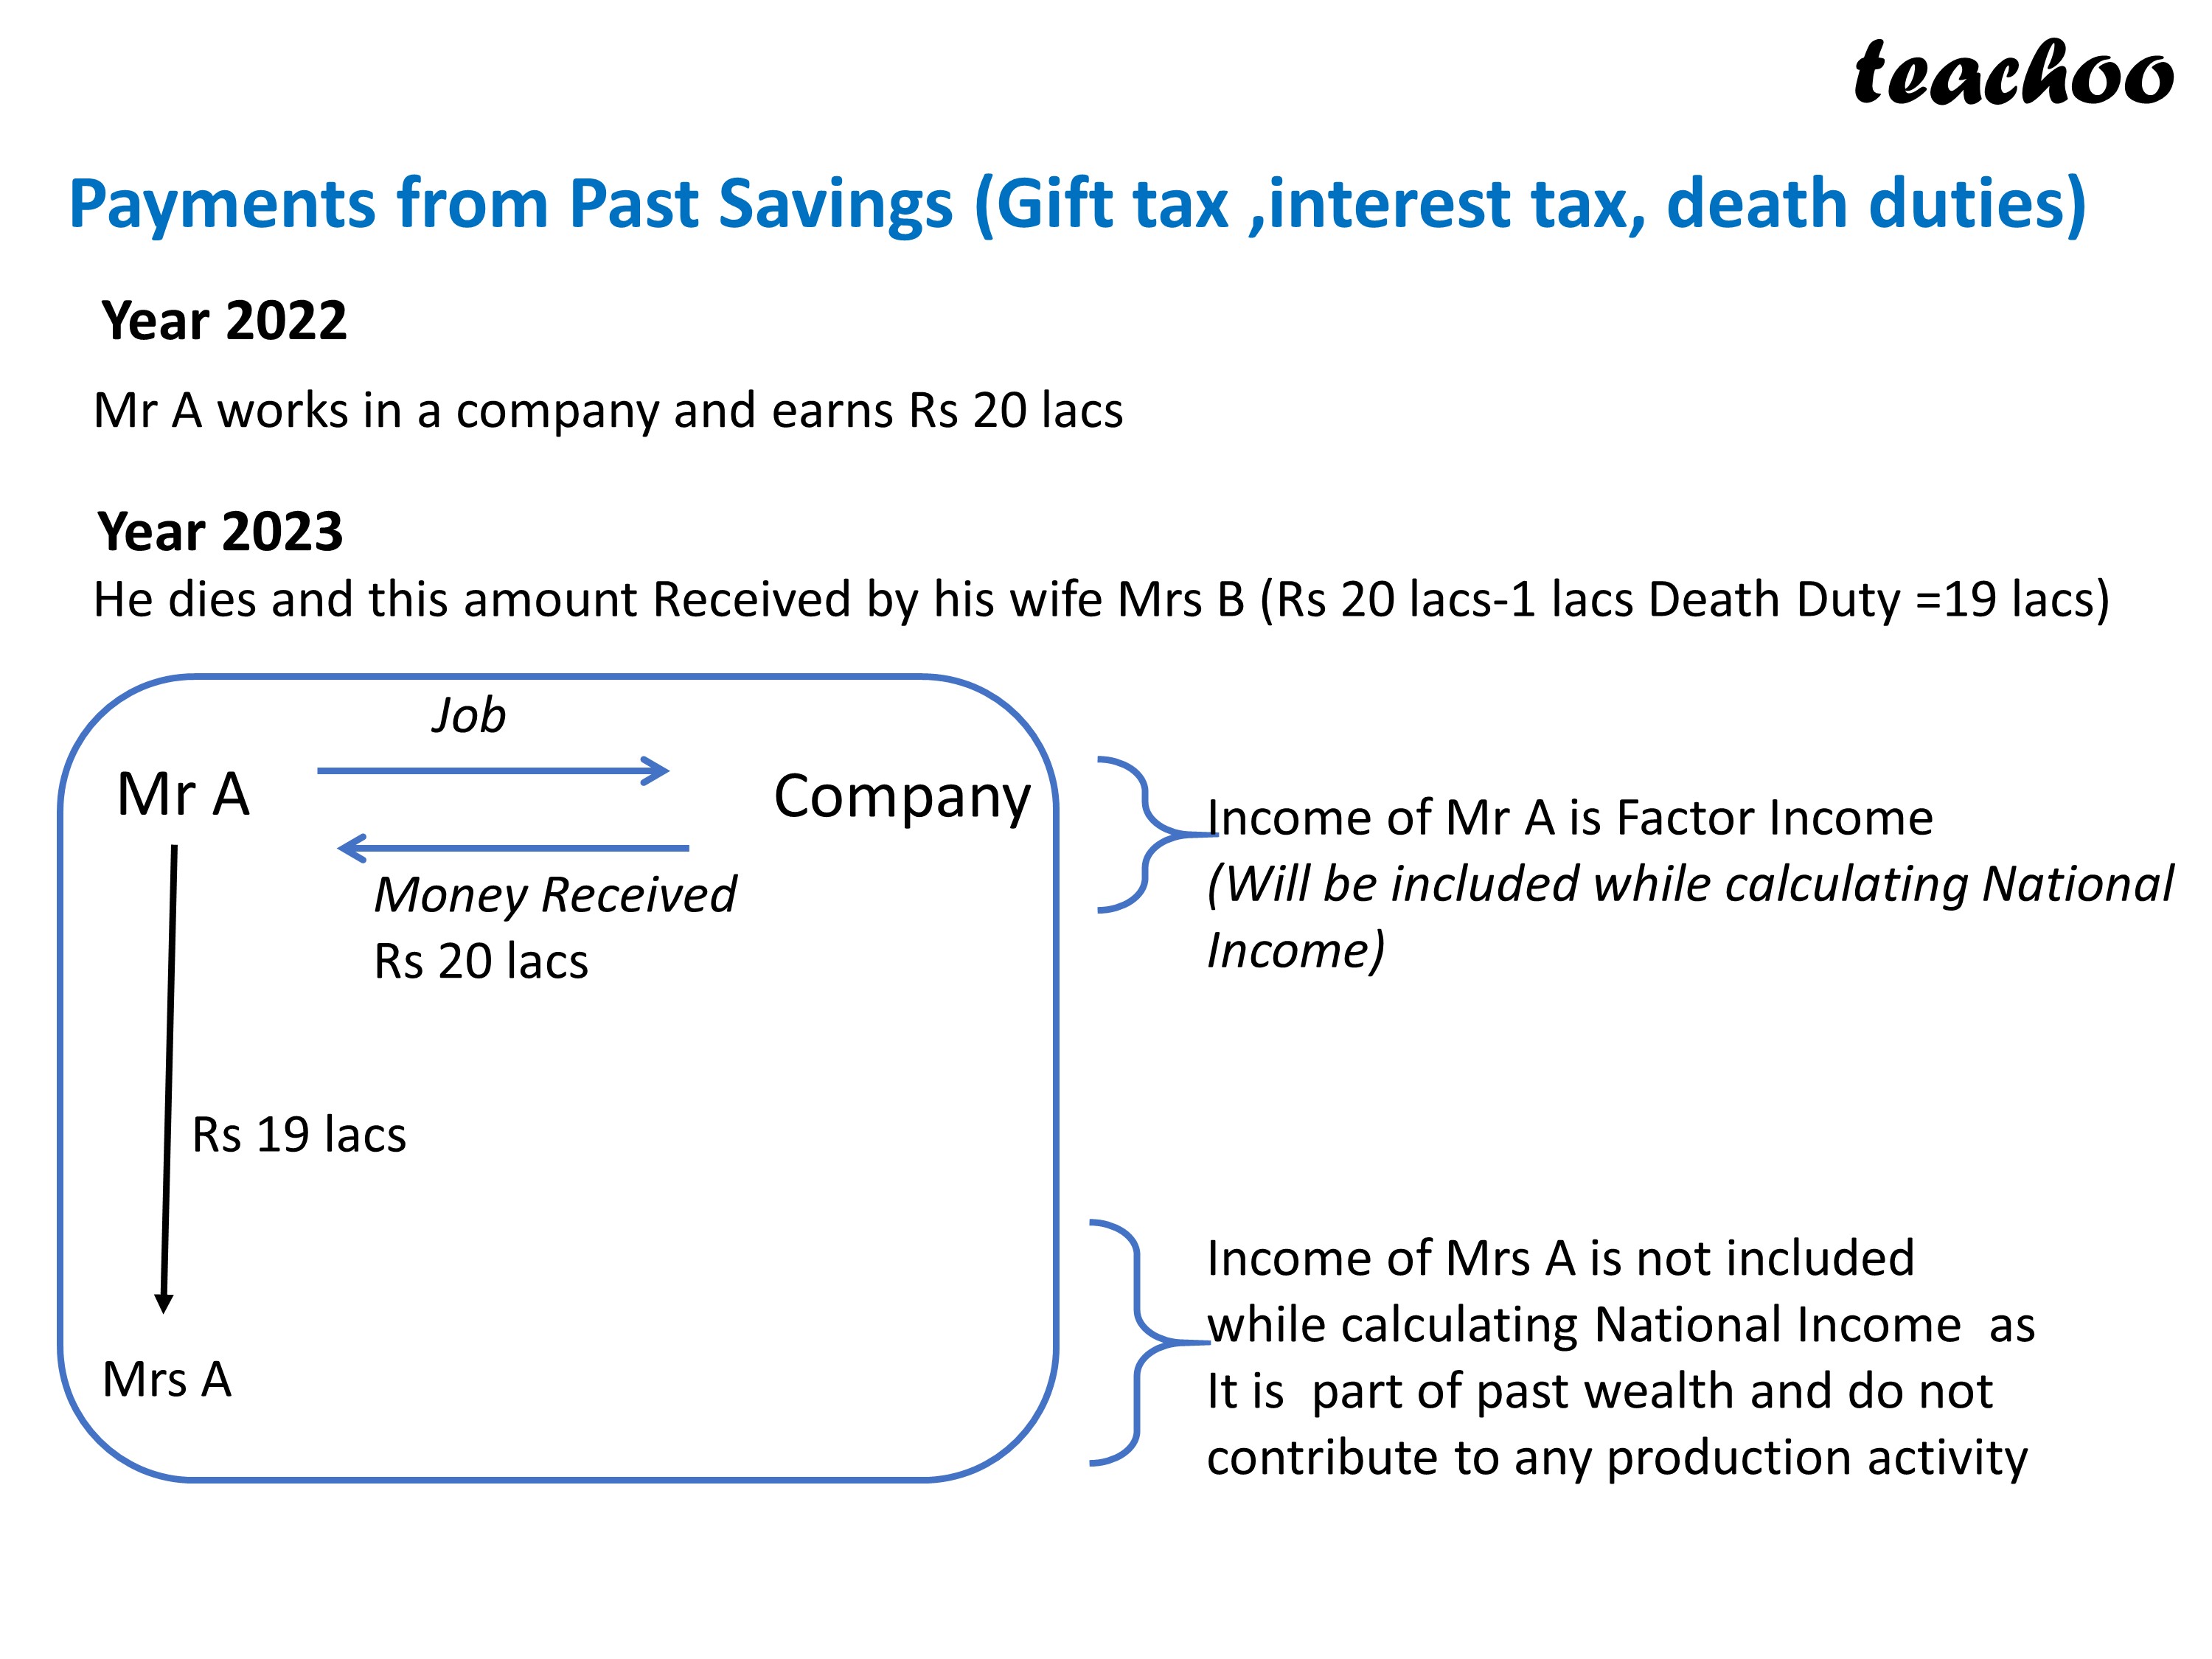 Payments from Past Savings (Gift tax ,interest tax, death duties).JPG